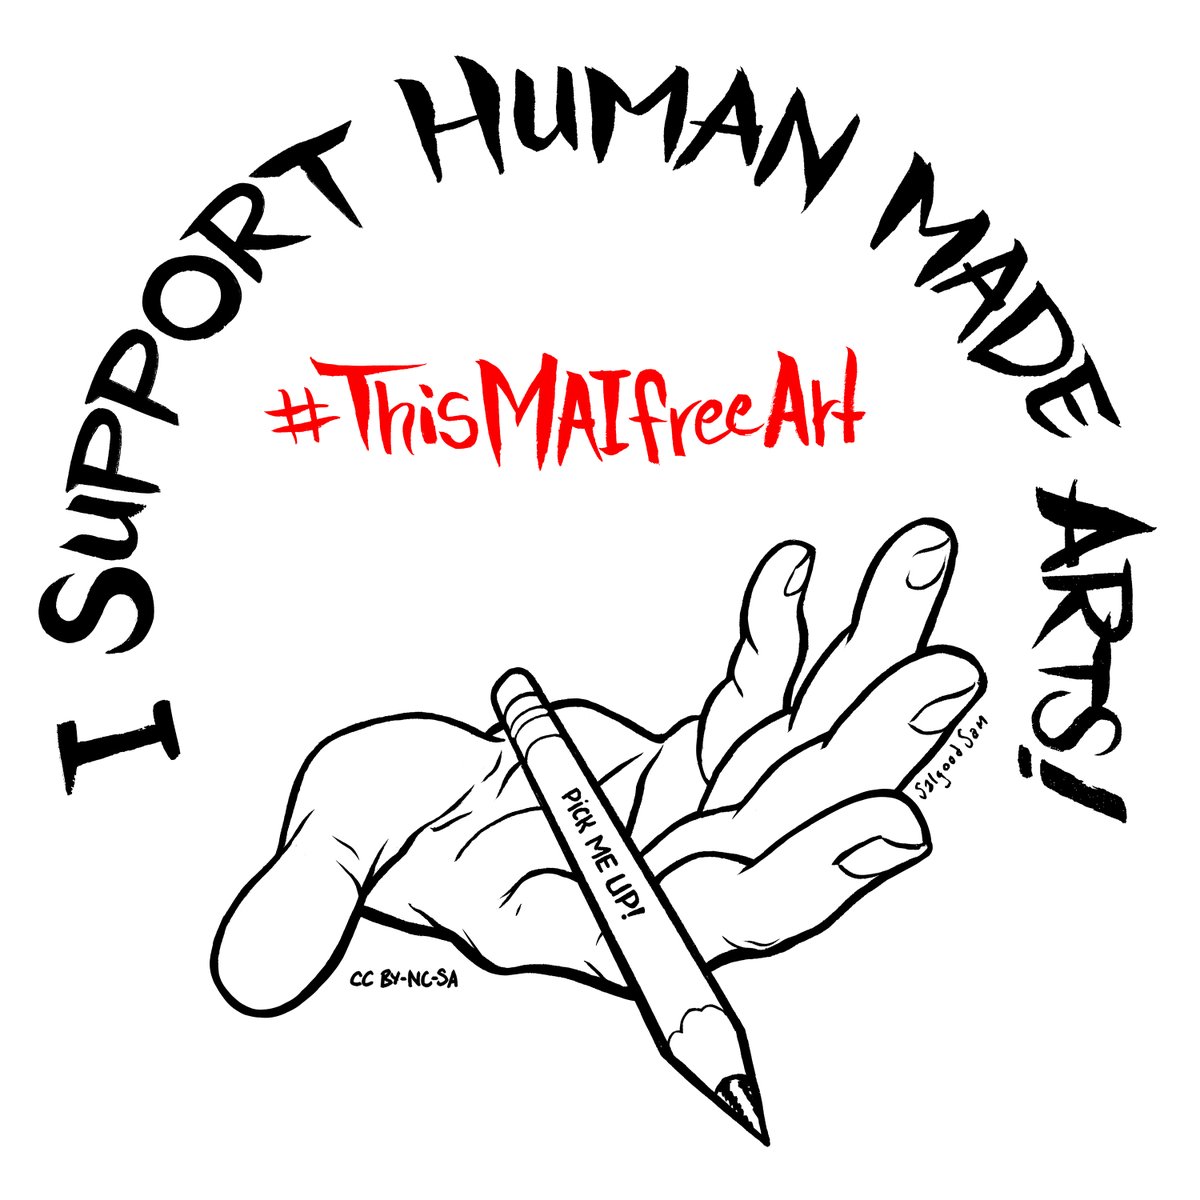 #ThisMAIFreeArt with us! 
Here’s our prompt list for this May! [31 days]
A ‘pro human’ information campaign and art challenge to promote human made Arts, and raise awareness of the issues around generative image tech!

More info TBA, rev your mind engines!
#noai #humanmadeart